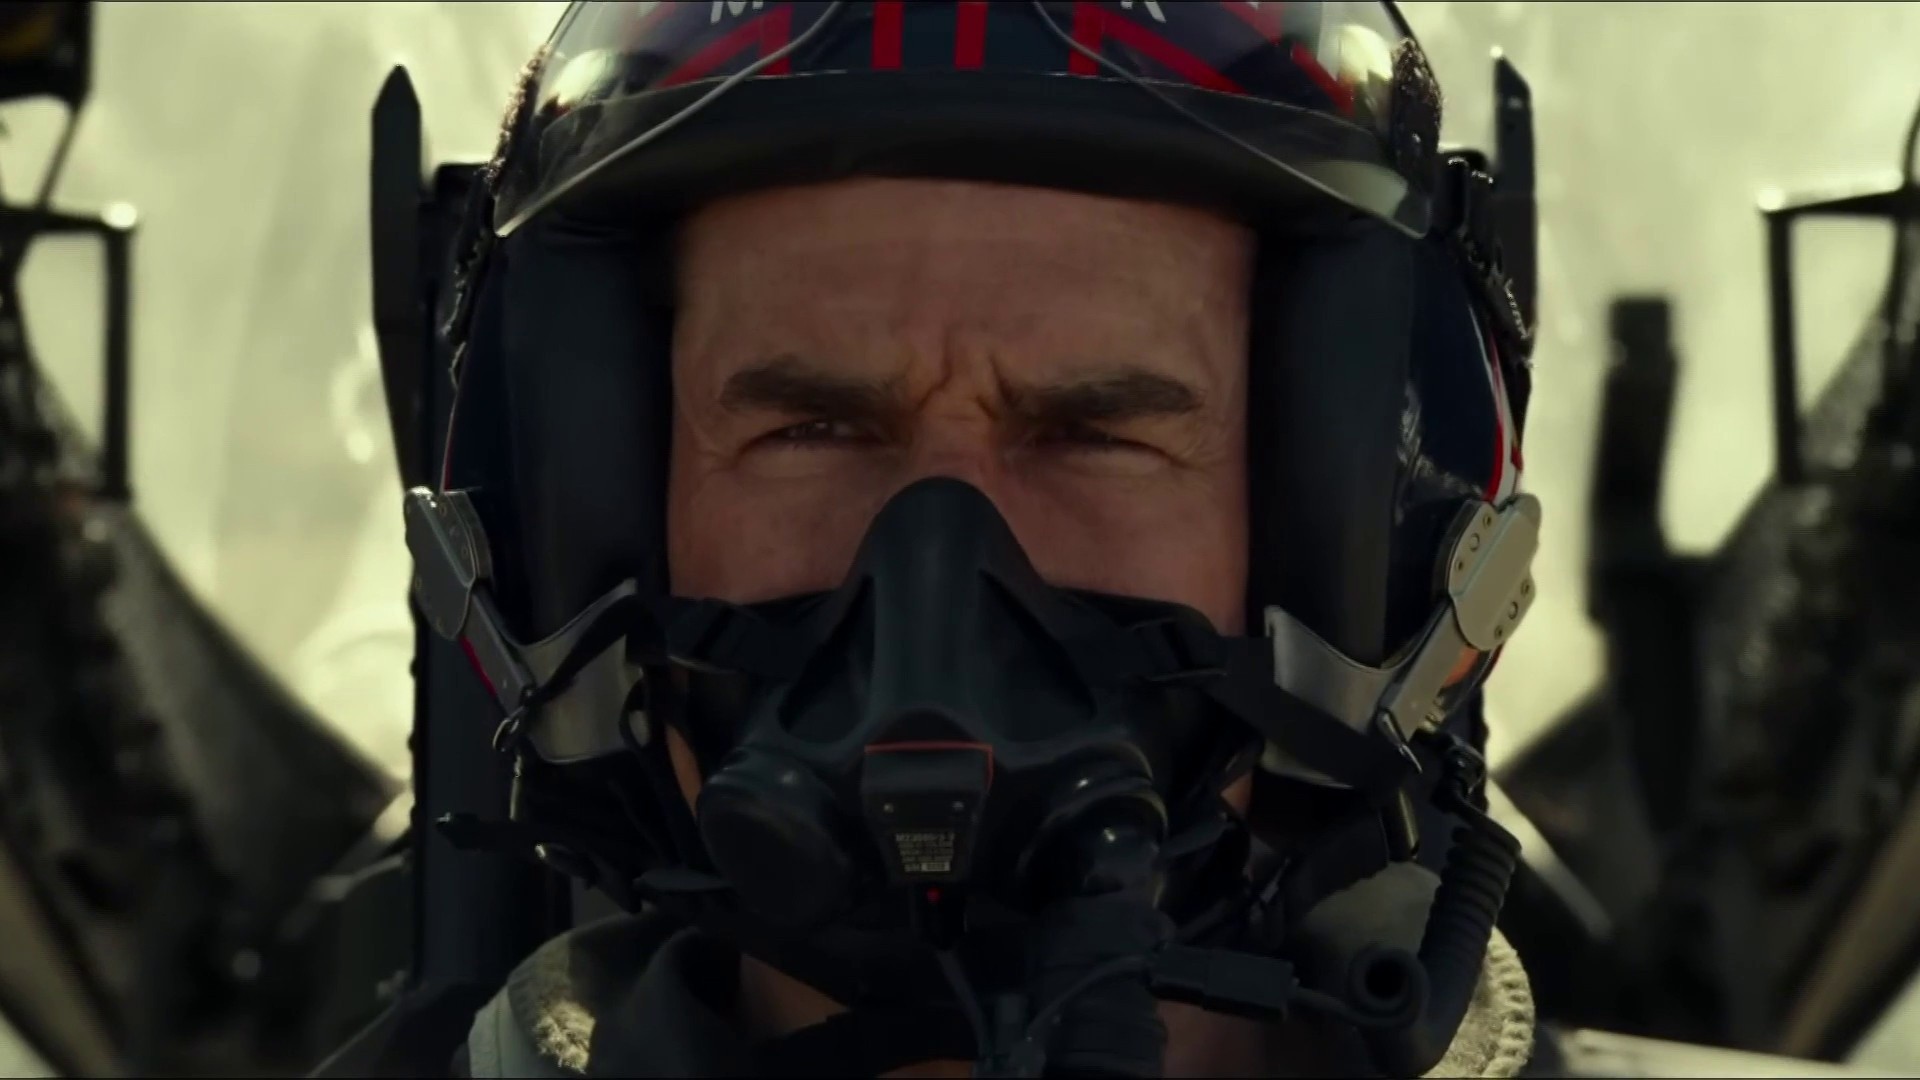 Need for more speed? There could be a 'Top Gun 3' in the works